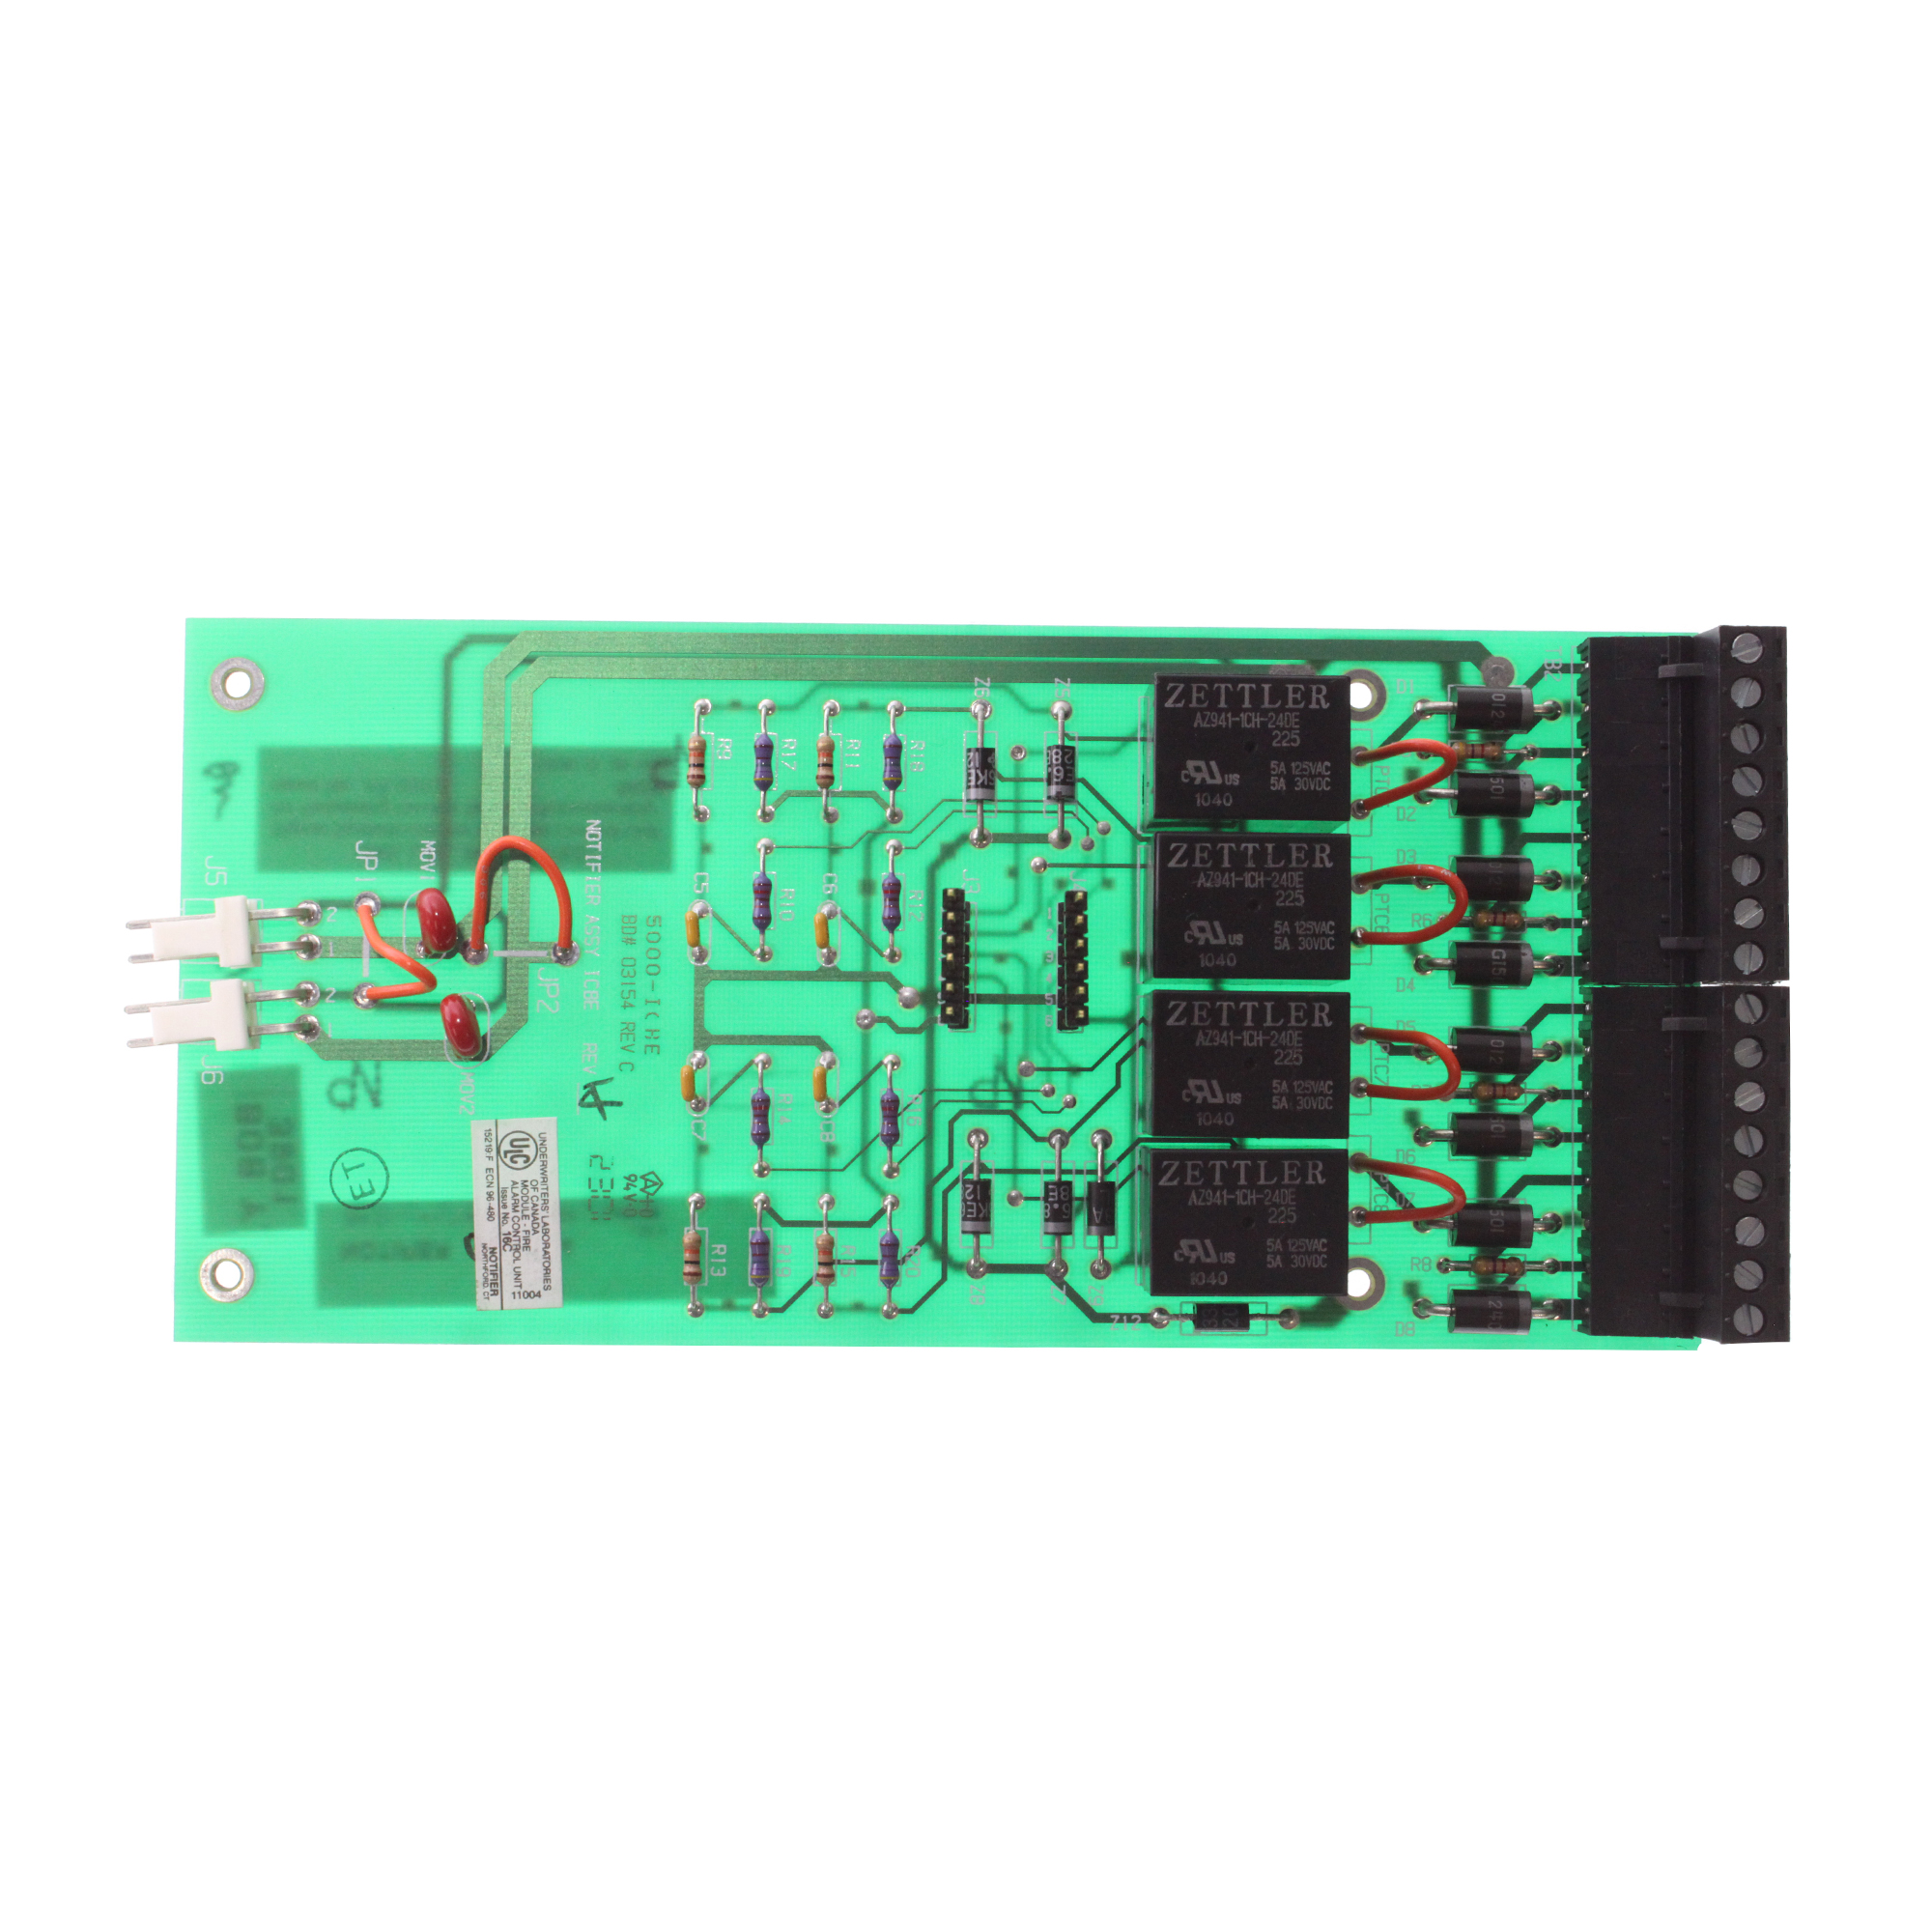 NOTIFIER ICE-4 INDICATING CIRCUIT EXPANDER MODULE BOARD FOR SYSTEM 500